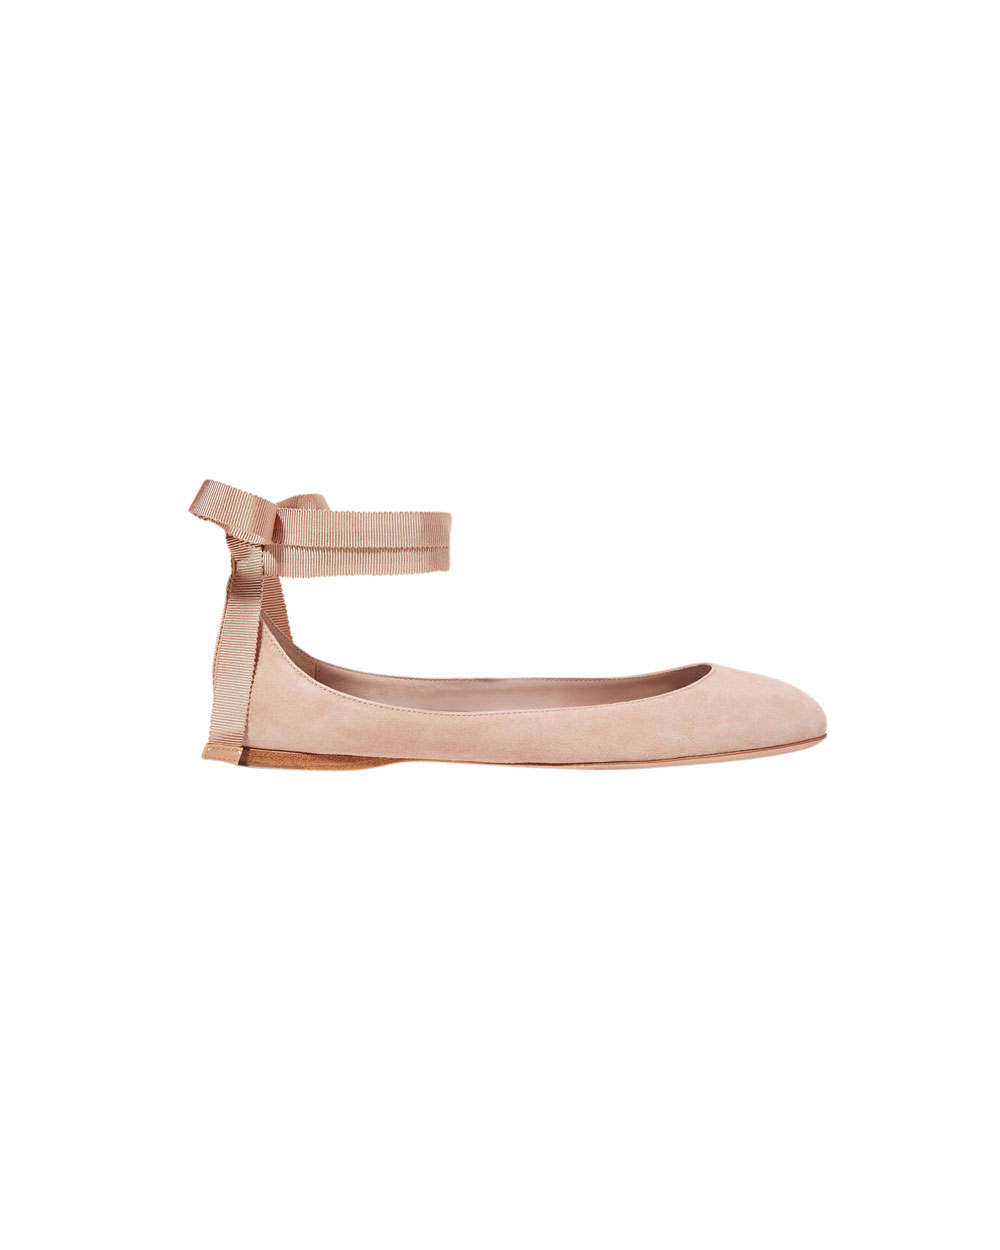 Aerin shoes, $927, from Net-a-Porter